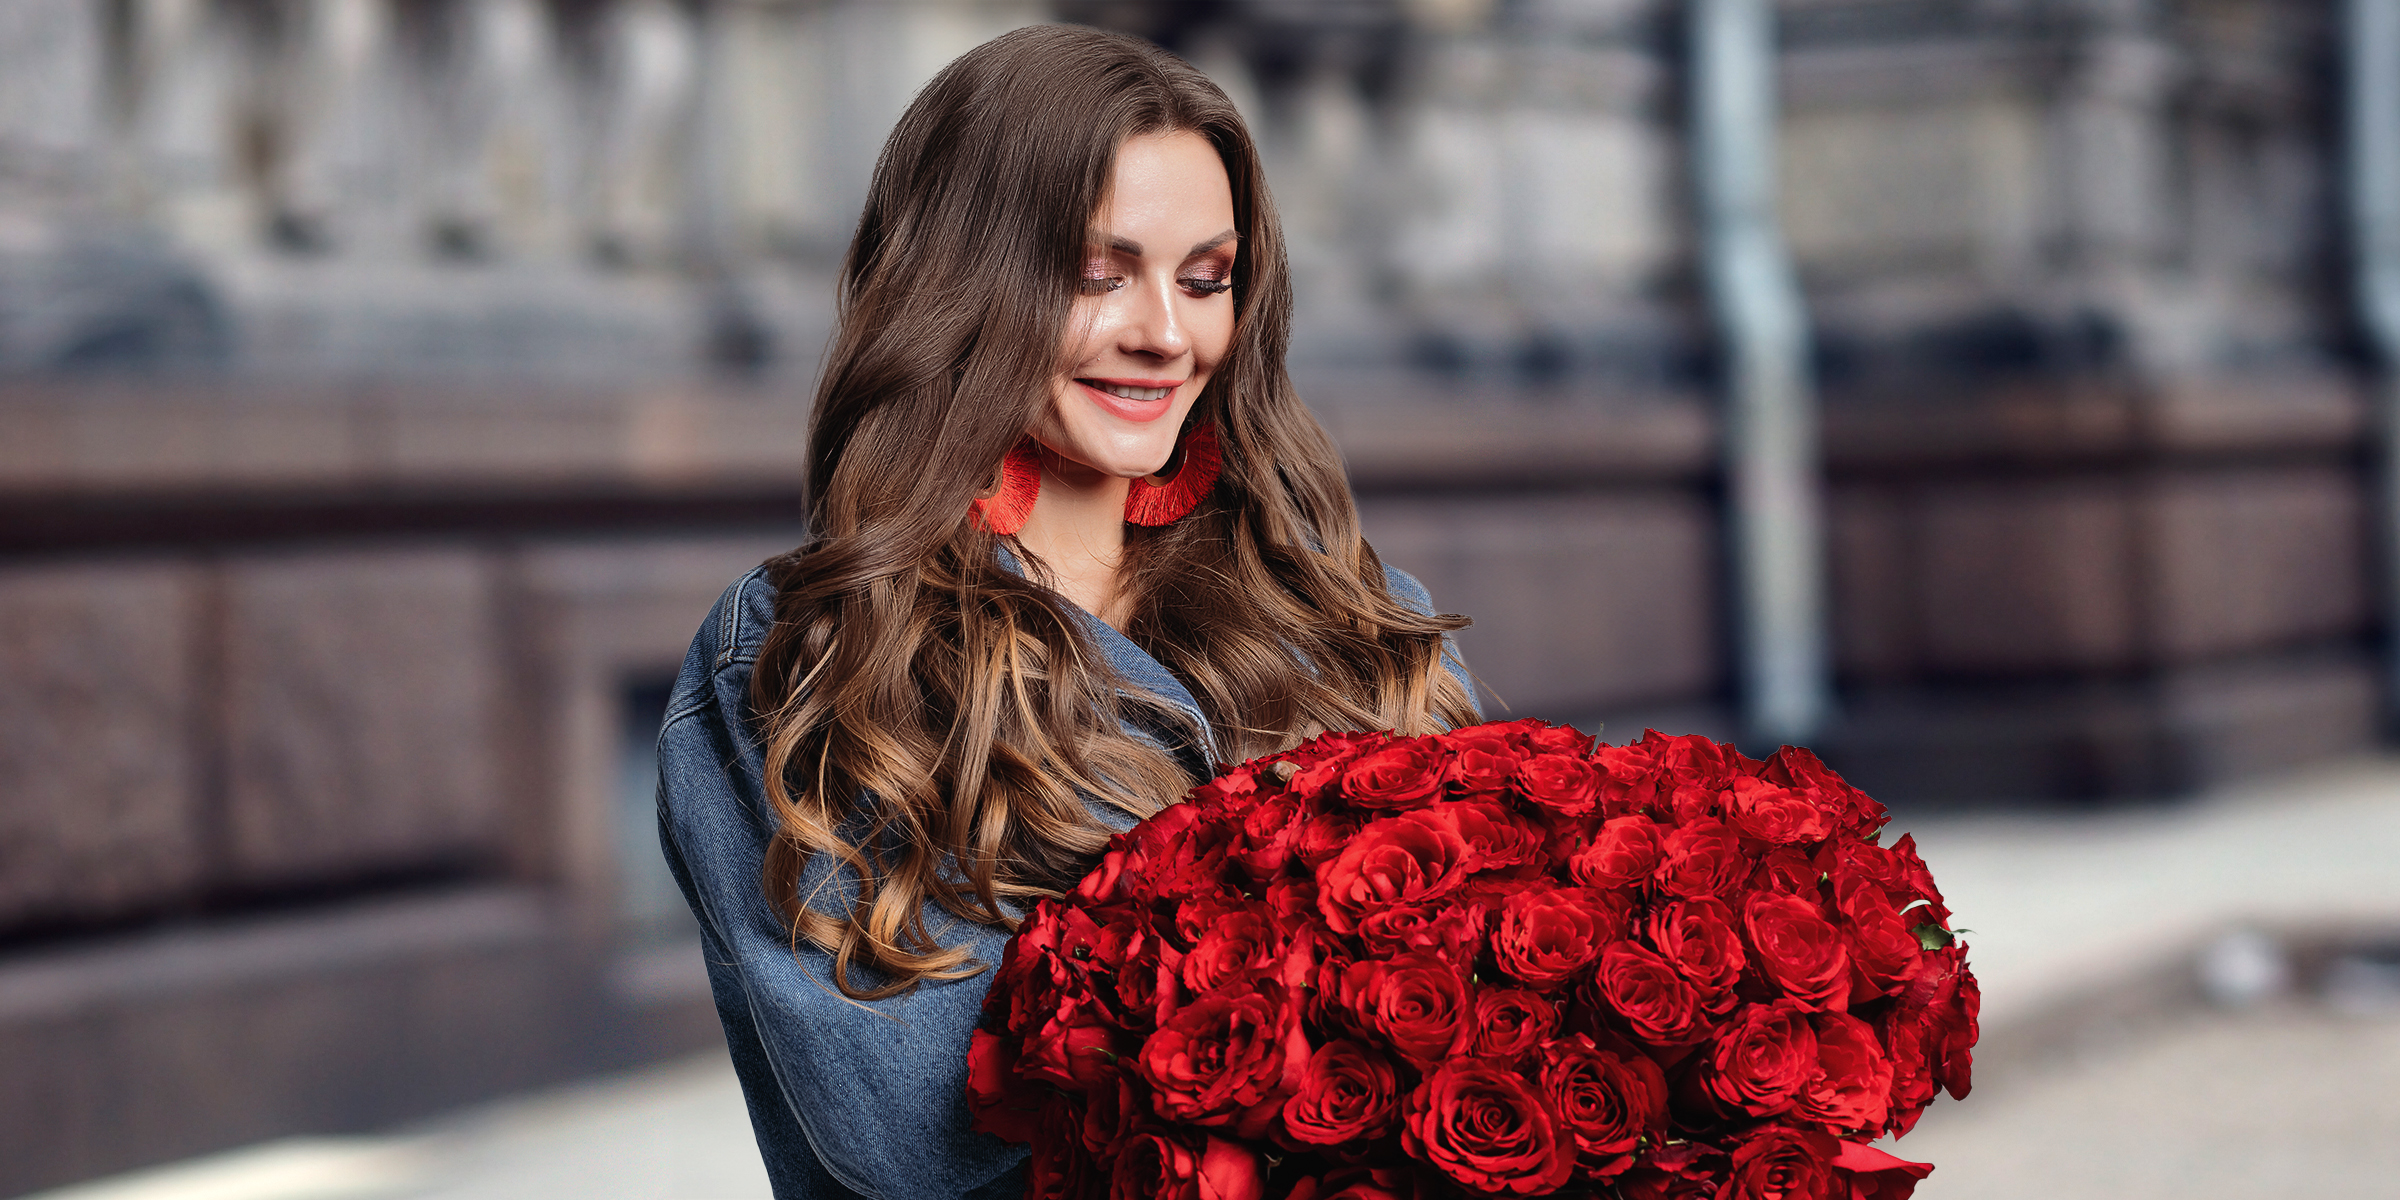 A happy woman holding a bouquet of red roses | Source: Shutterstock